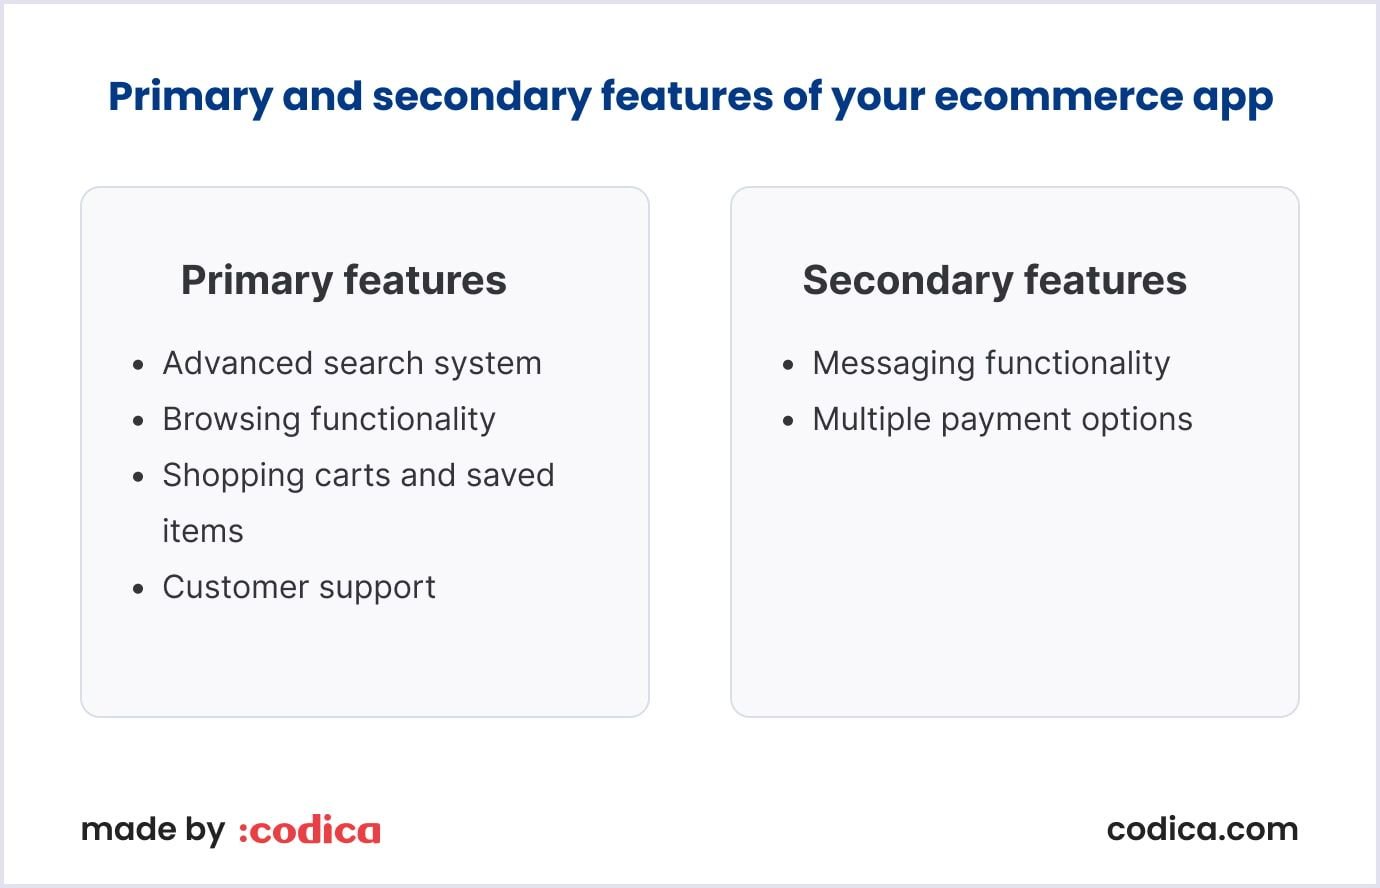 Ecommerce app's main and secondary features